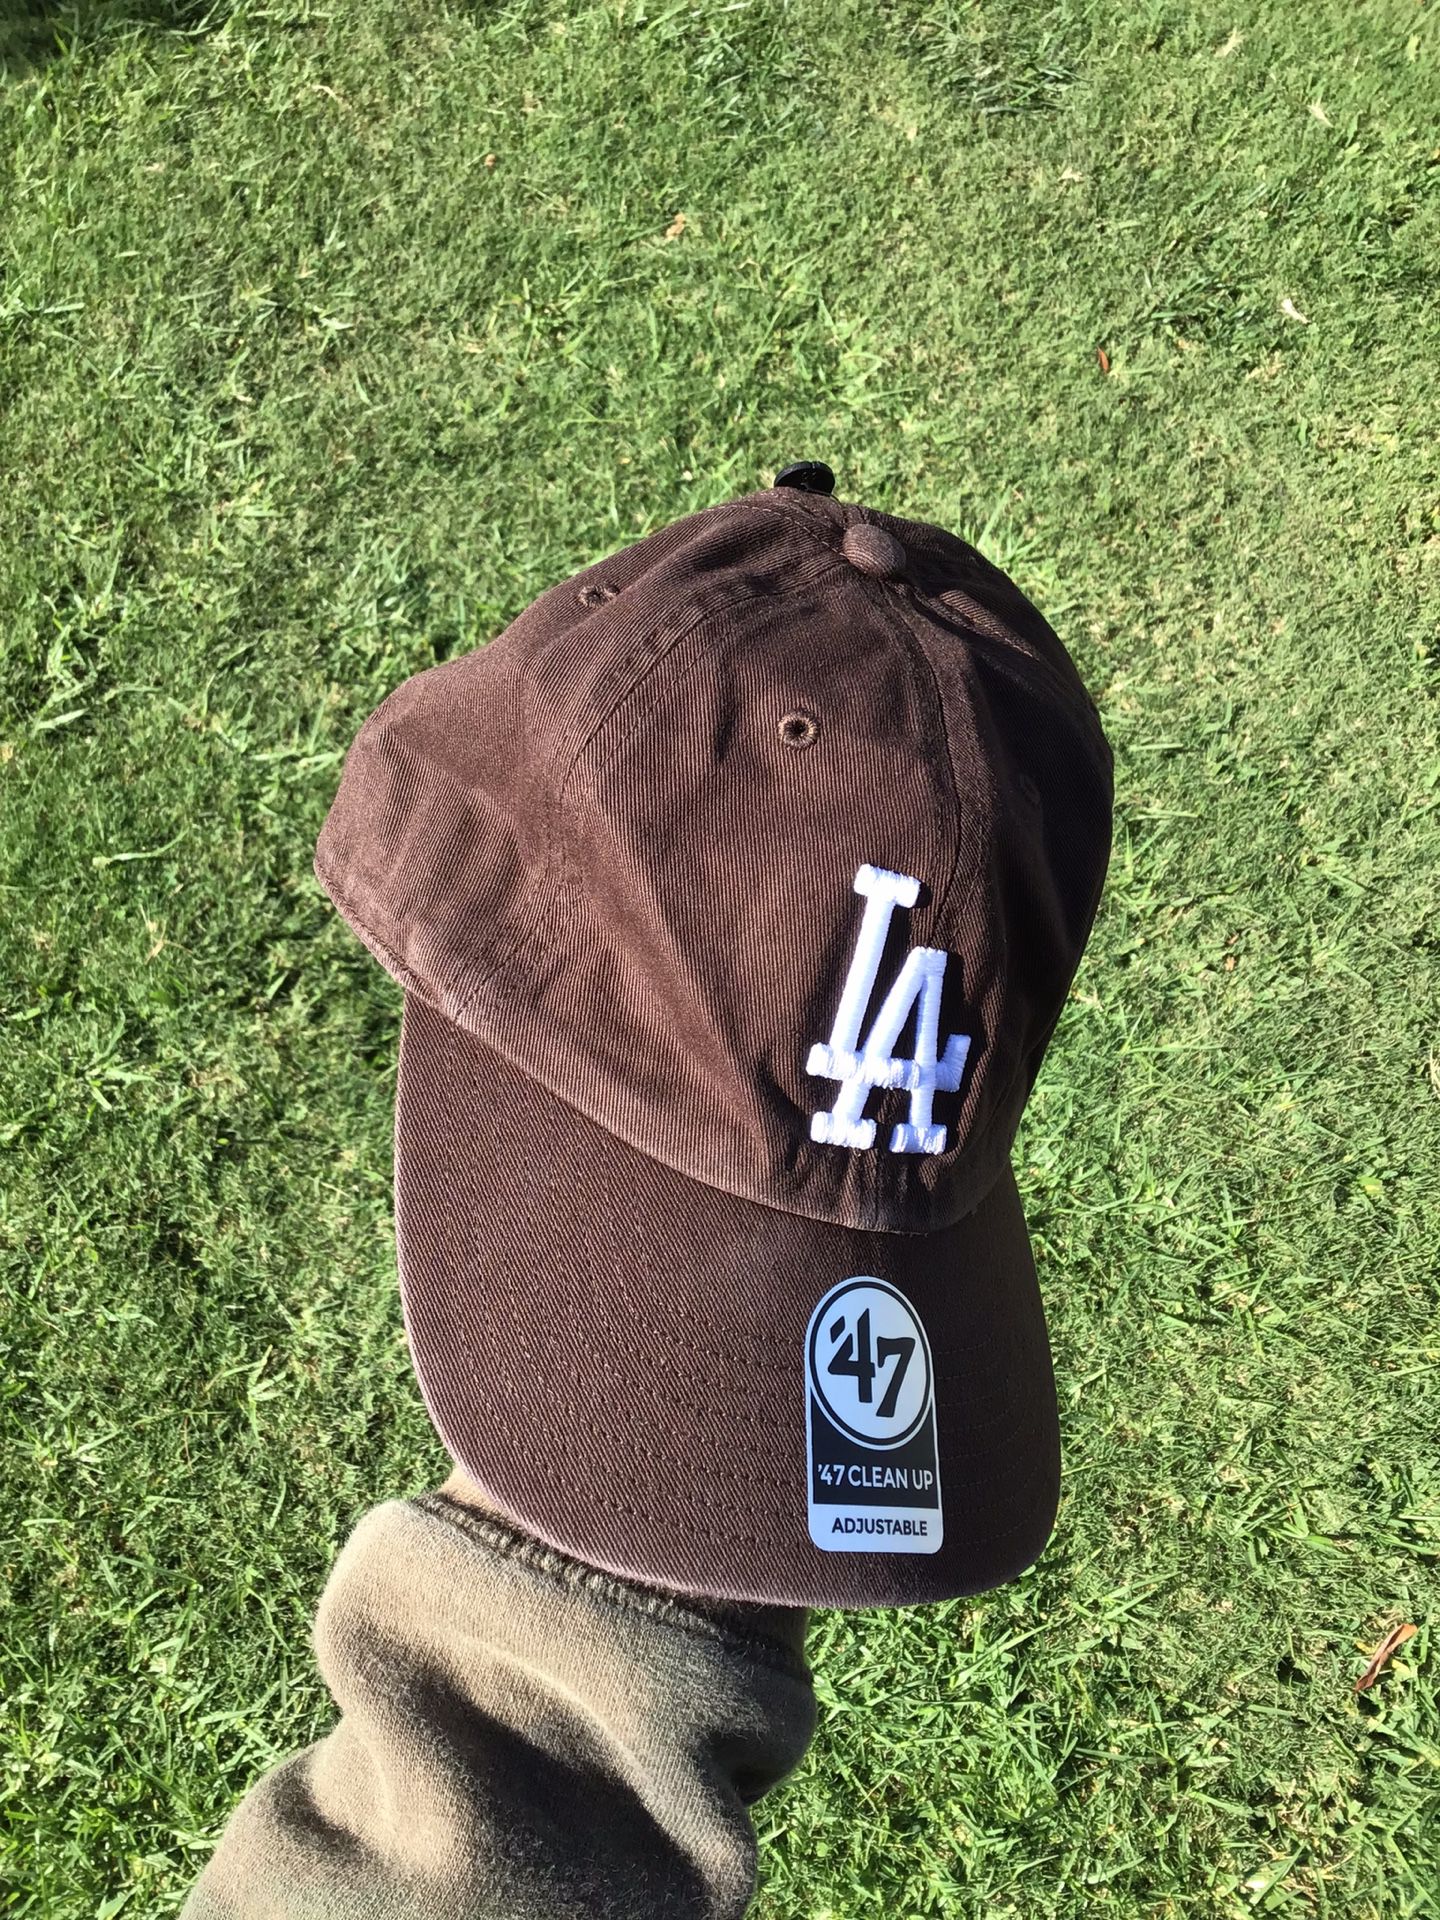 47 Clean Up Hat Adjustable Hats Los Angeles Dodgers MLB Baseball Caps Mens Womens Youth Fashion Clothing Dodgers Jewelry Accessories 47 Brand 